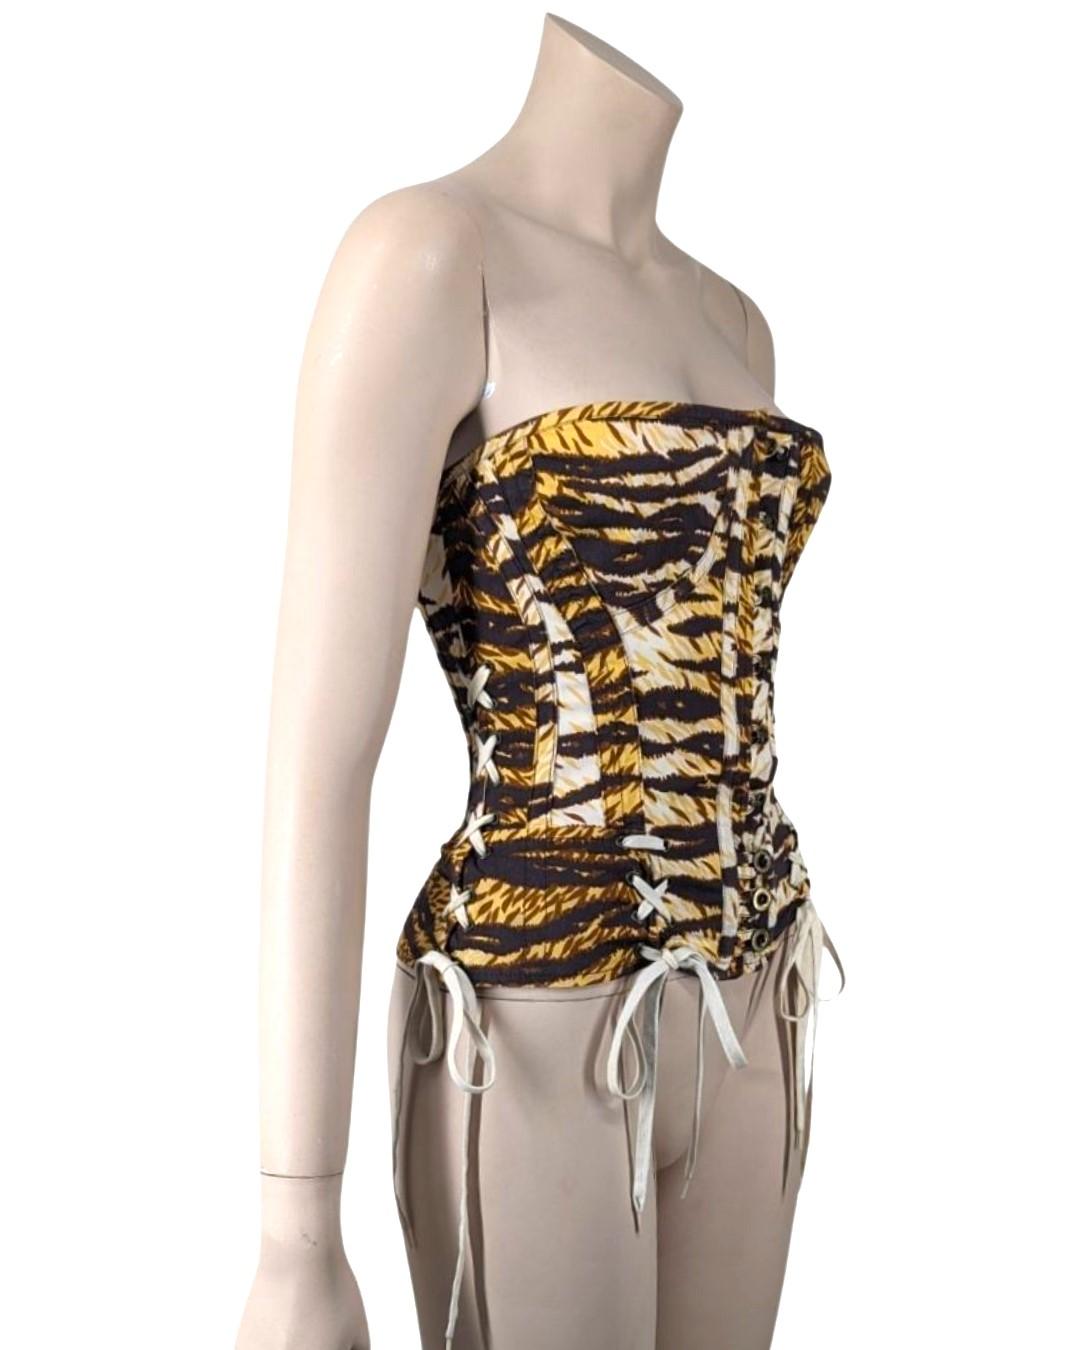 D&G top corset with lacing on each sides. Circa 2000s. Rare.

· Front opening with metal busc
· Tiger print
· Boning
 

Fits S / Marked 26/40

Flat measurements : 

Breast :  38 cm
Waist :  30 cm
Length : 35 cm
 
Colors : Multicolored 

Content :